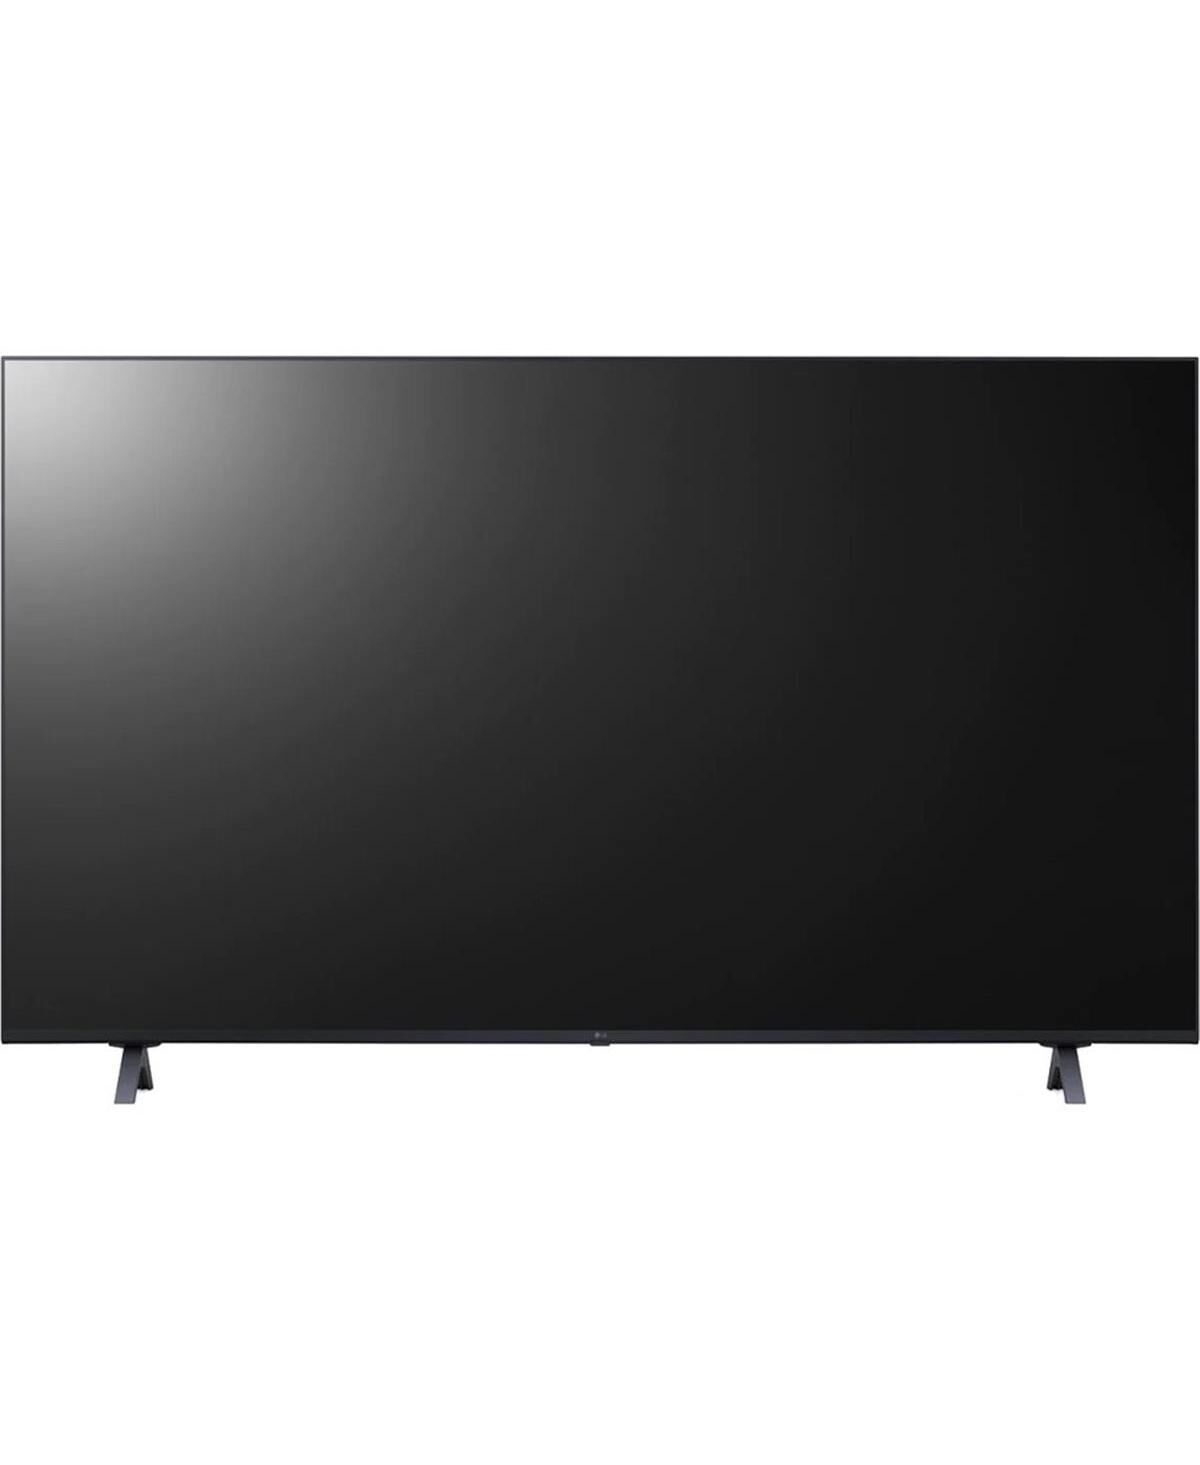 LG Commercial Tv 50 in. 3840 x 2160 120 Hz Uhd Taa Simple Editor Wi-Fi Hdmi Lcd Tv - Black